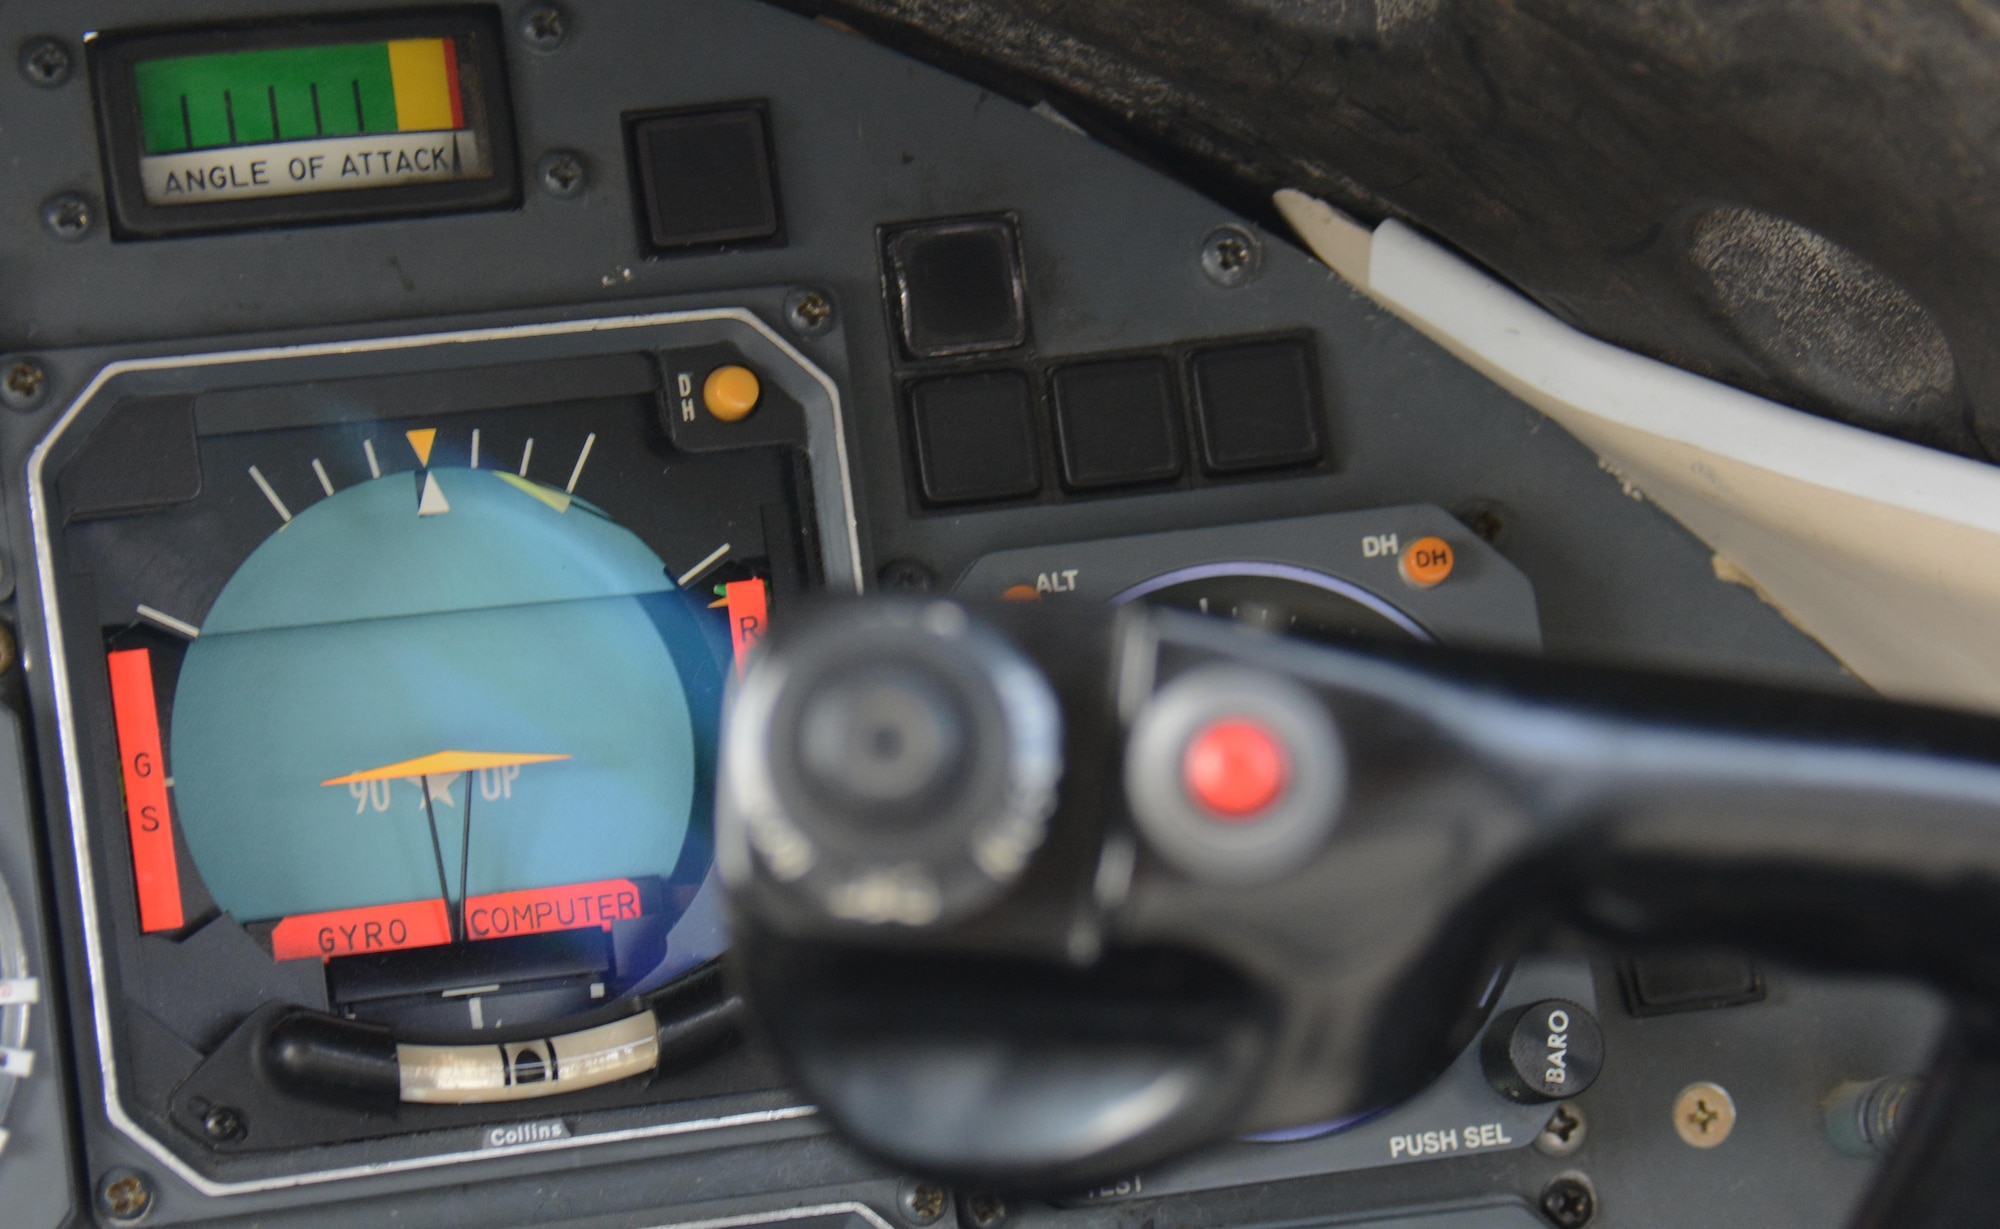 An attitude direction indicator is displayed inside the cockpit of a C-21 Learjet at the annual Flight Line Fest at Al Udeid Air Base, Qatar, Jan. 10. The ADI provides pilots with important information such as the pitch they must maintain to keep the aircraft level during flight. The C-21 was a popular attraction during the event as many people asked for tours of the aircraft. Flight Line Fest is a joint partnership between the 379th Air Expeditionary Wing and Qatar Emiri Air Force held to foster relations between Qatar and the United States. (U.S. Air Force photo by Tech. Sgt. James Hodgman/Released)